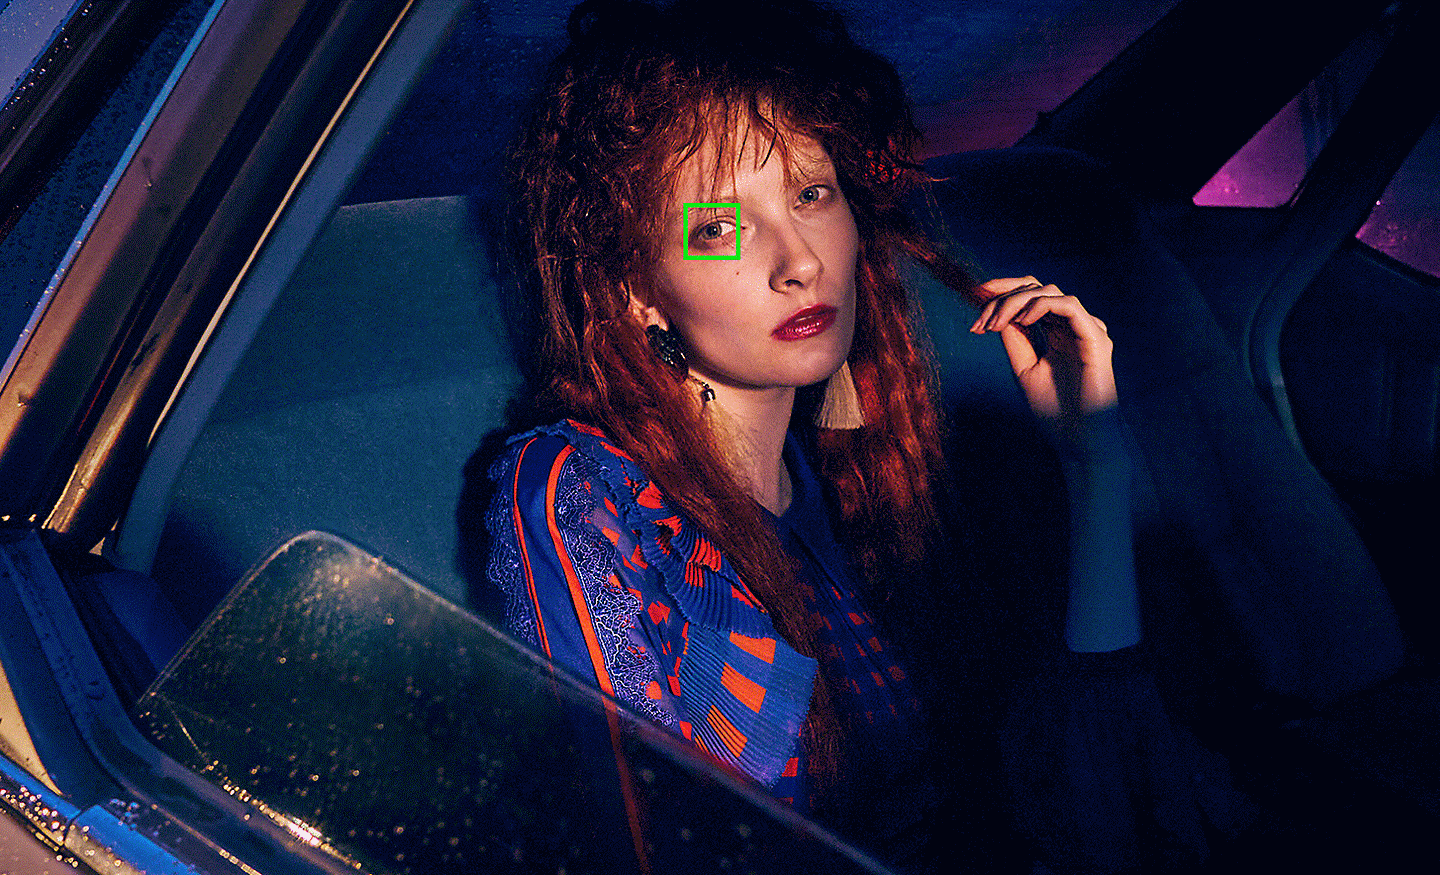 Low-light image of woman in car with a green AF point over her eye